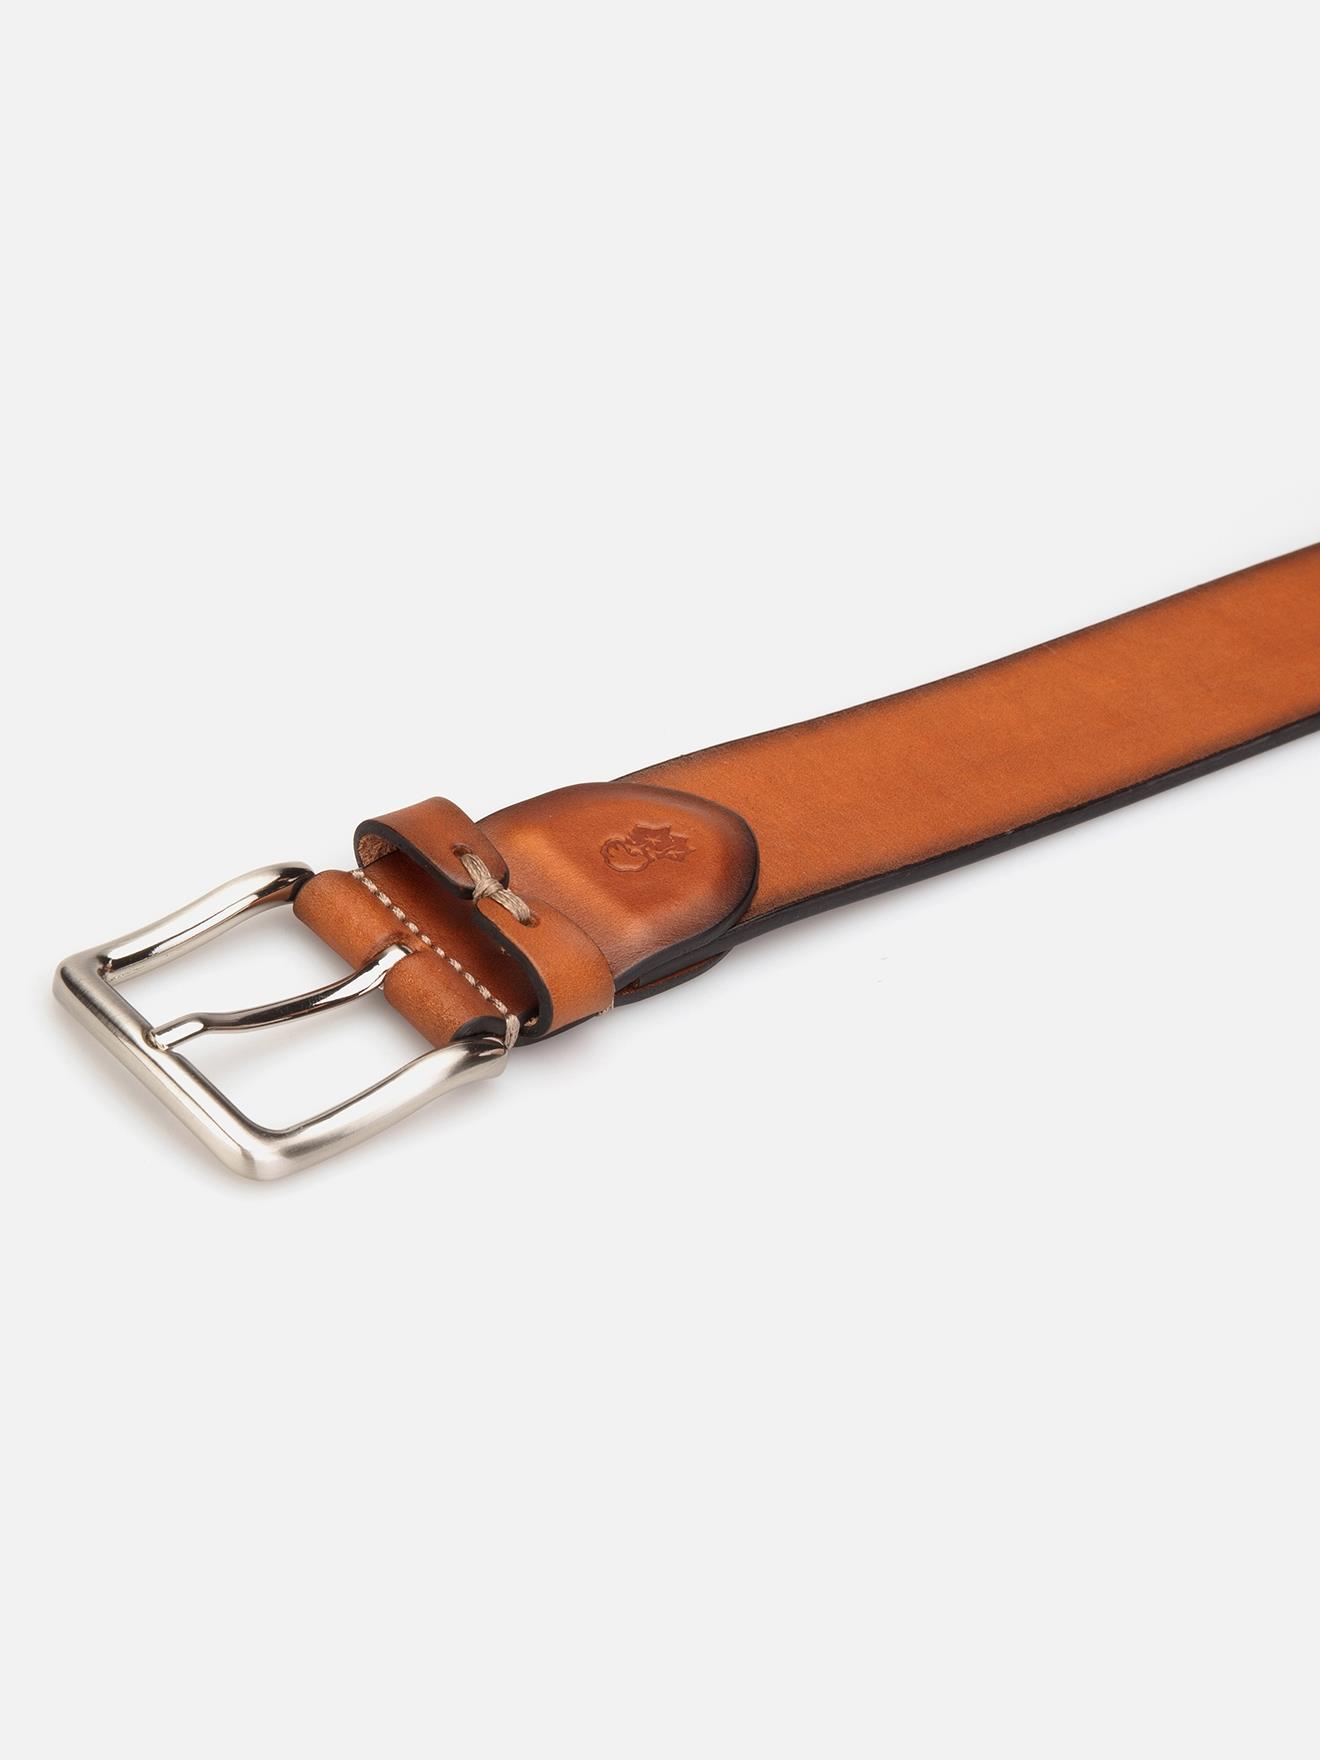 Brown patinated leather belt